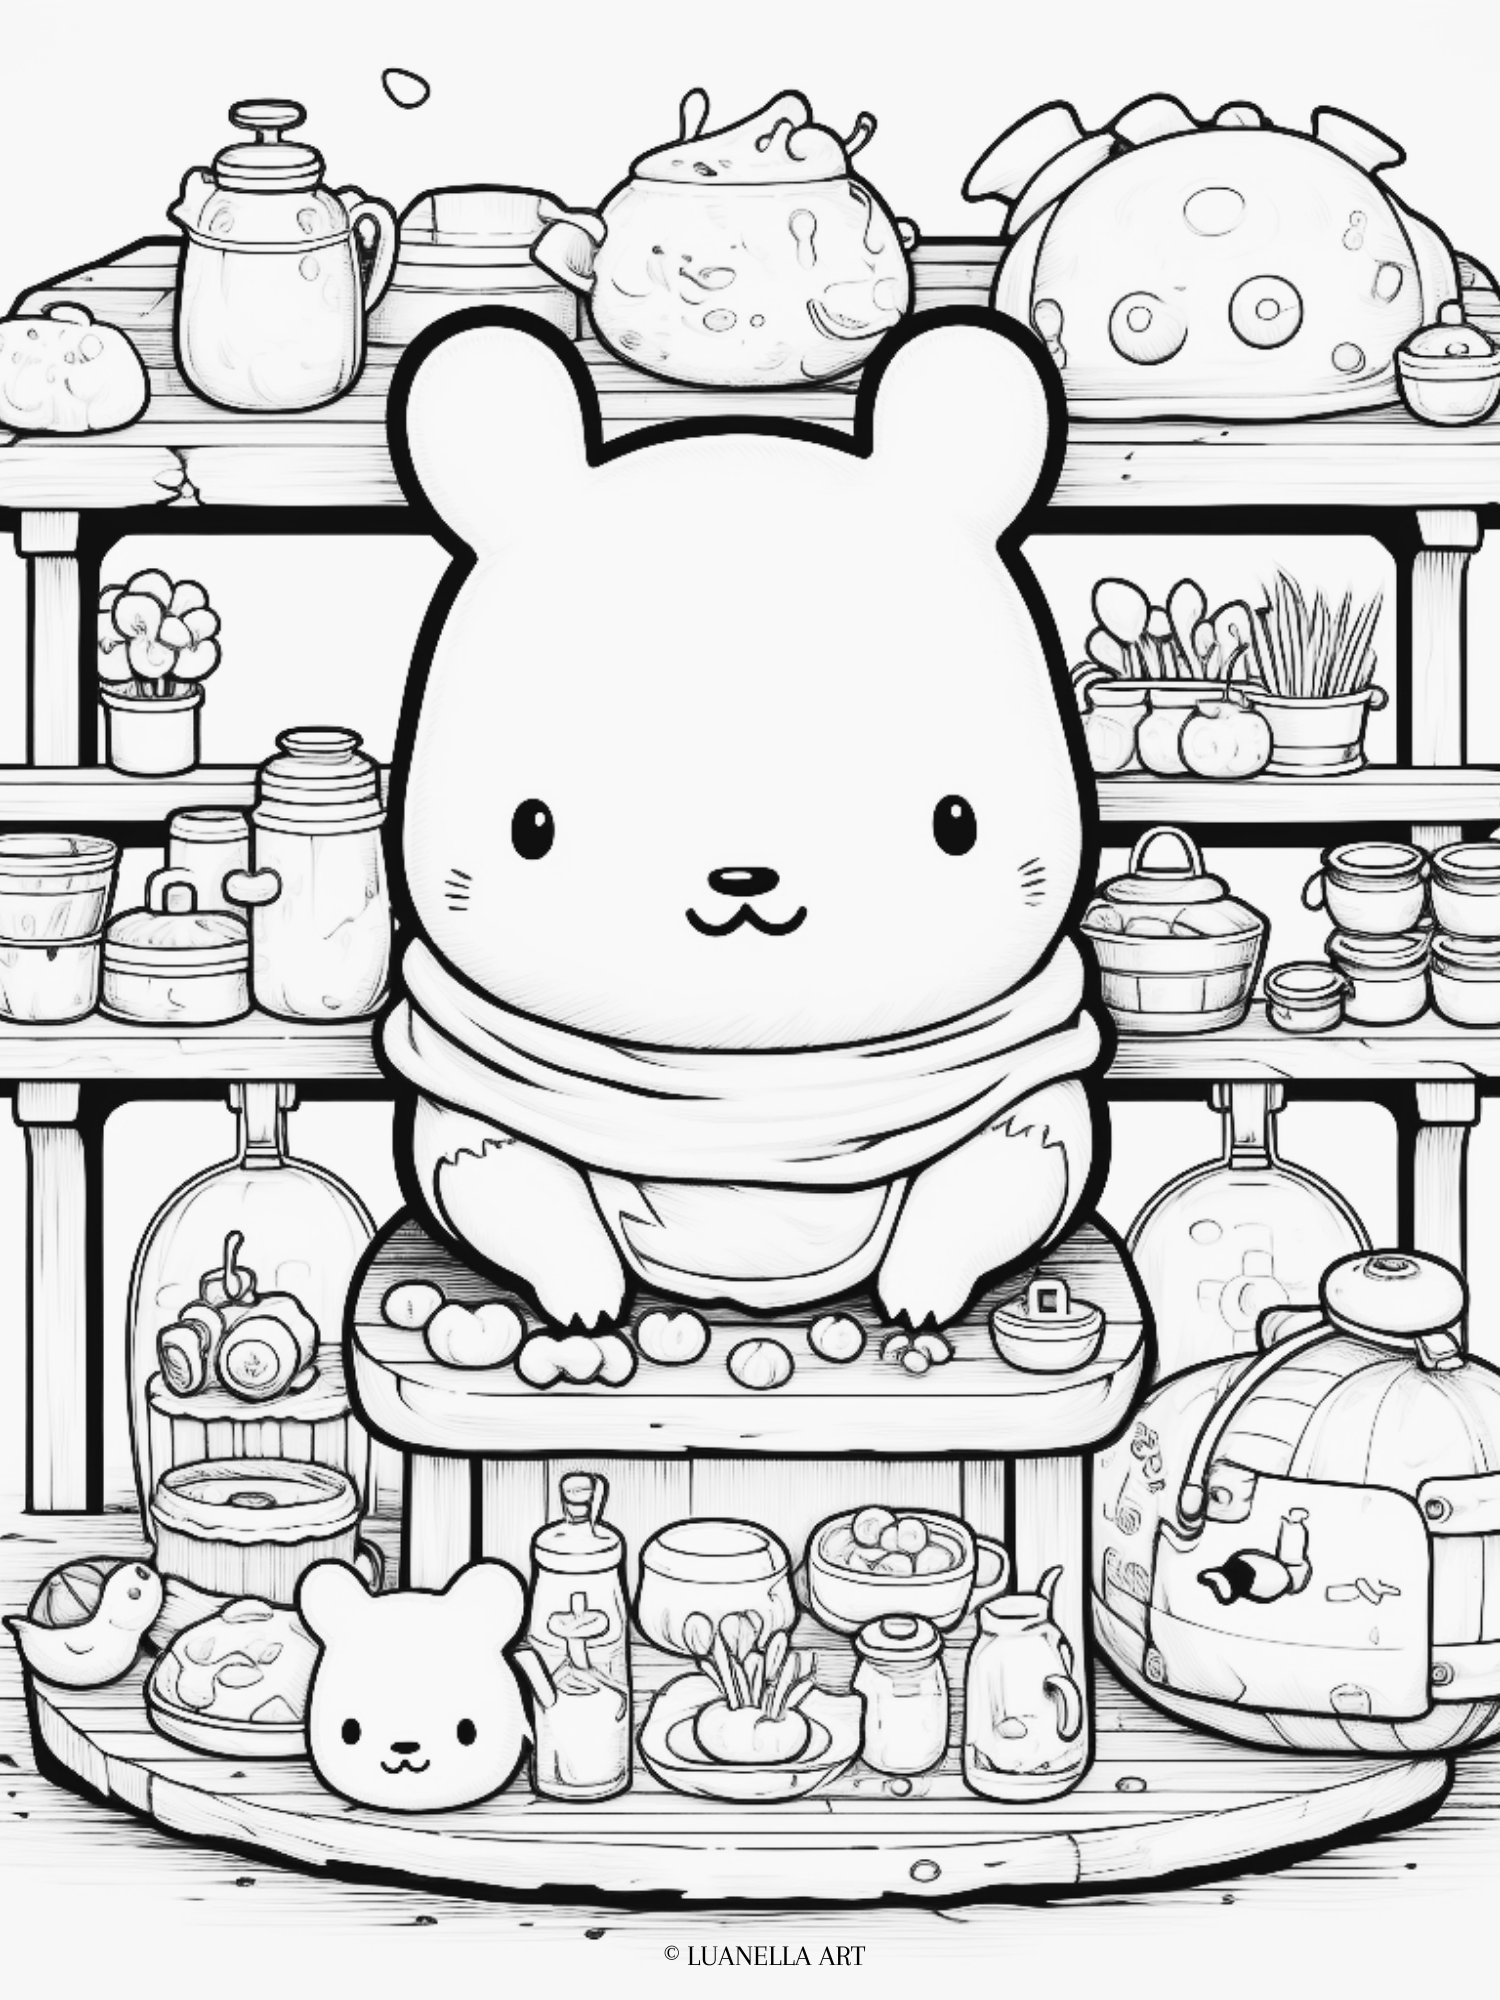 Pompompurin in the kitchen coloring page instant digital download â luanella art